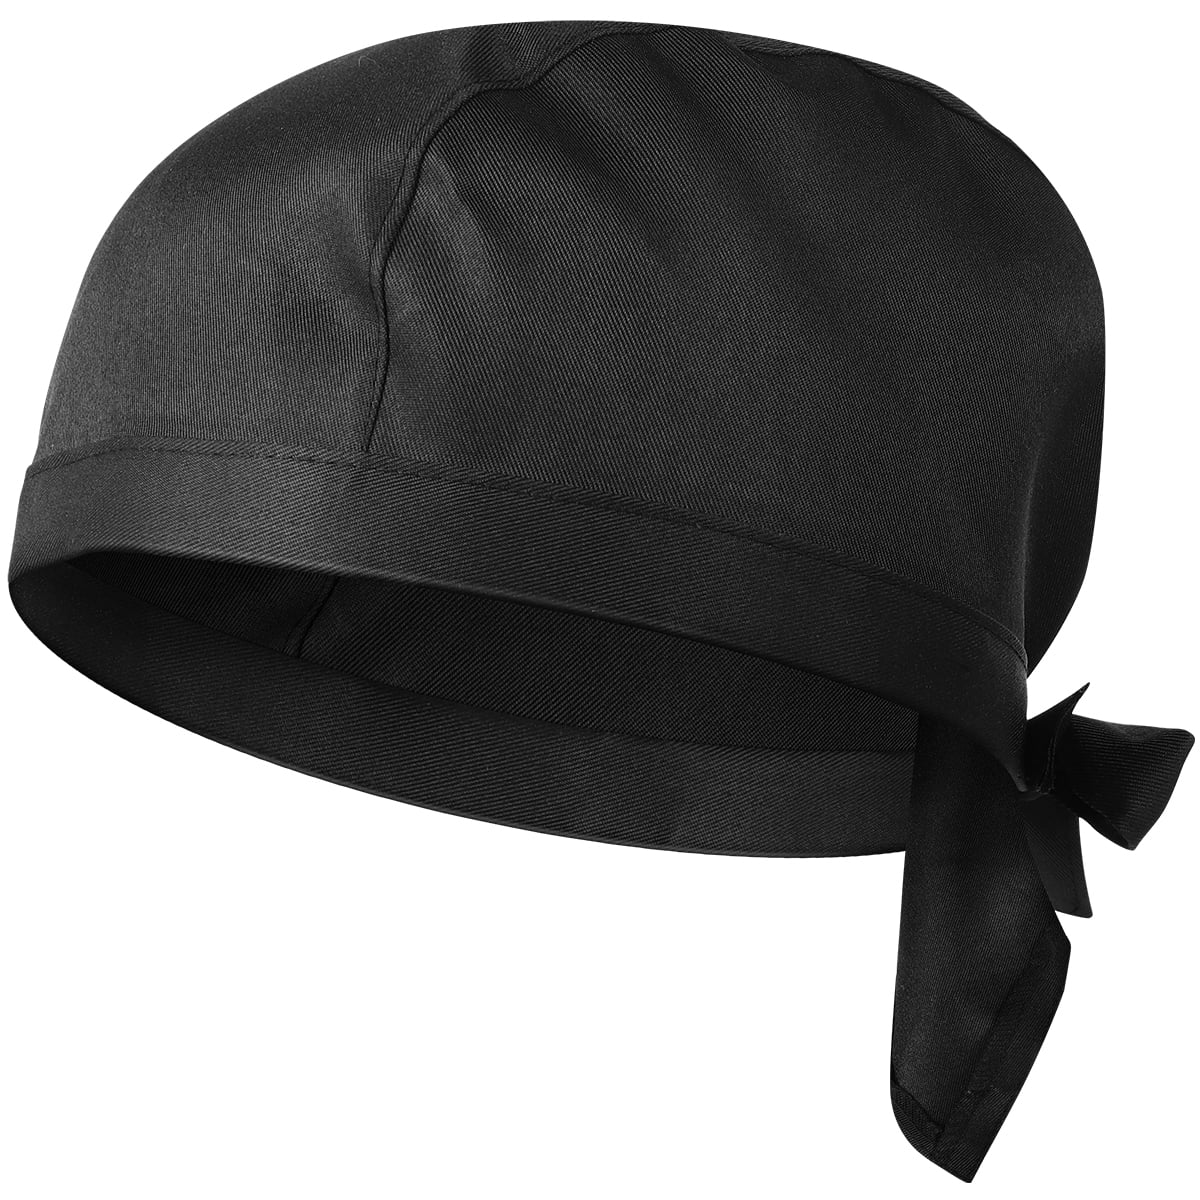 Denny Chef Skull Cap Size Large Catering 